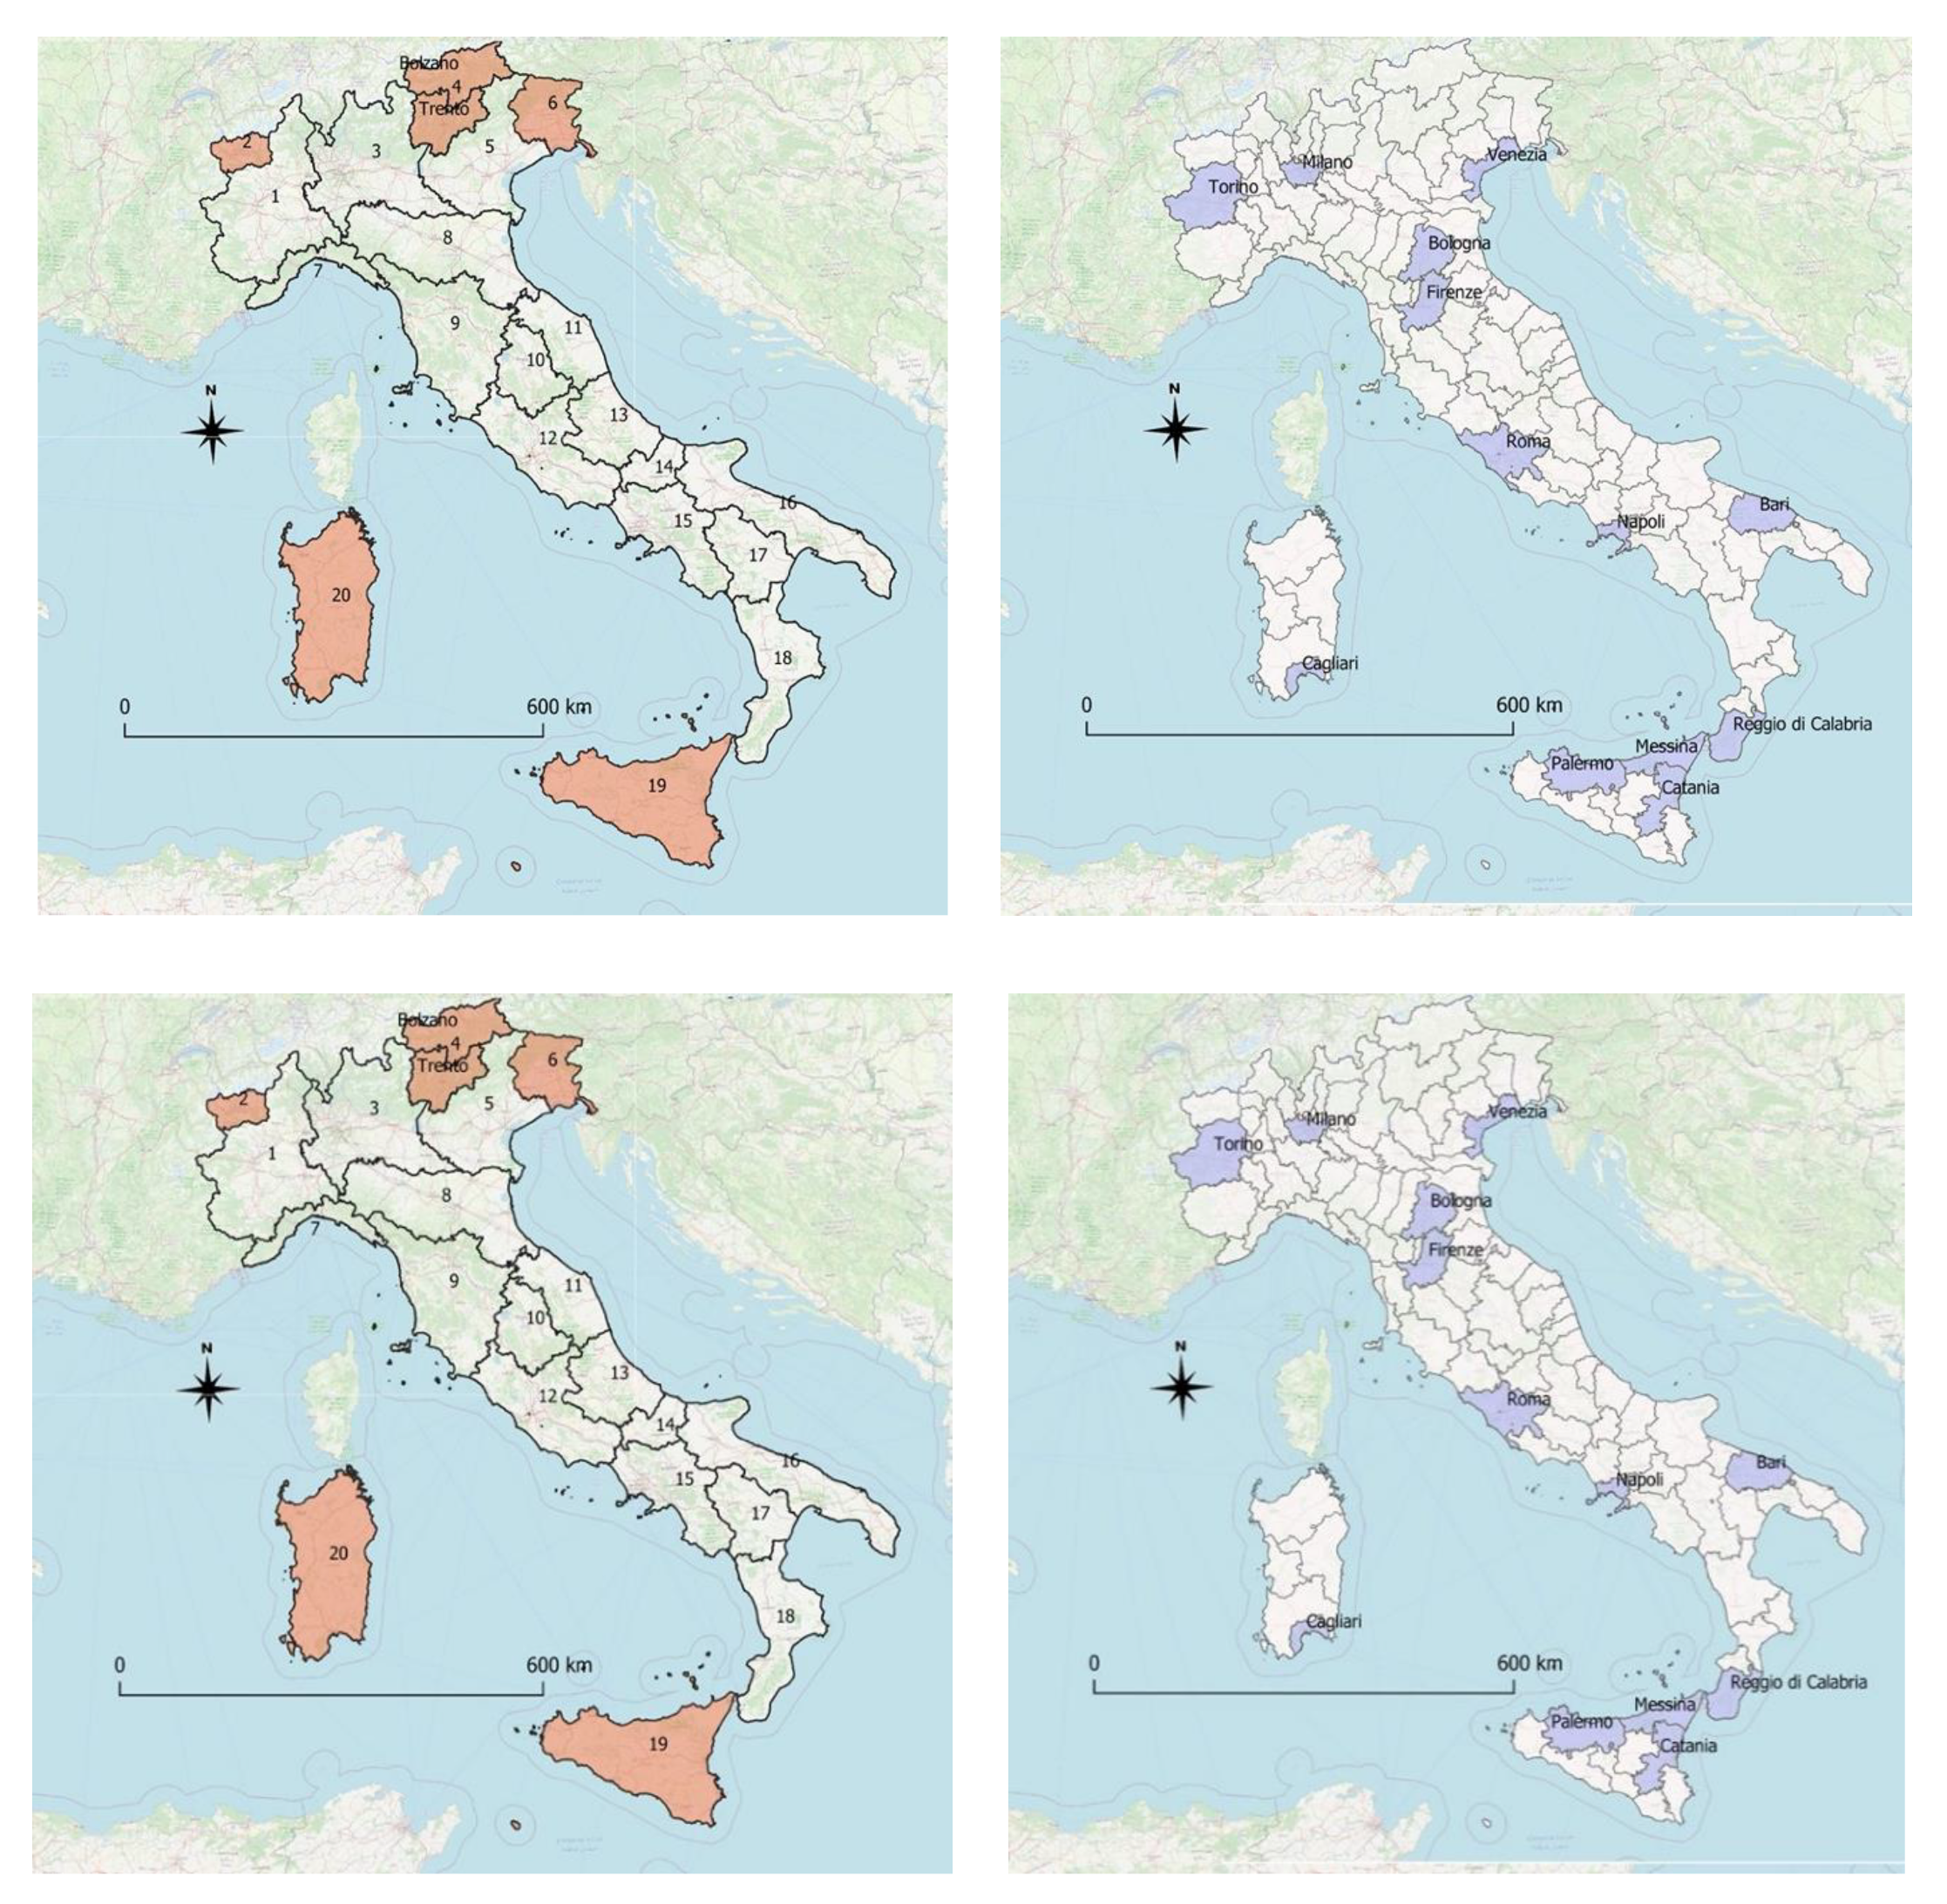 Sustainability | Free Full-Text | Why Italy First? Health, Geographical and  Planning Aspects of the COVID-19 Outbreak